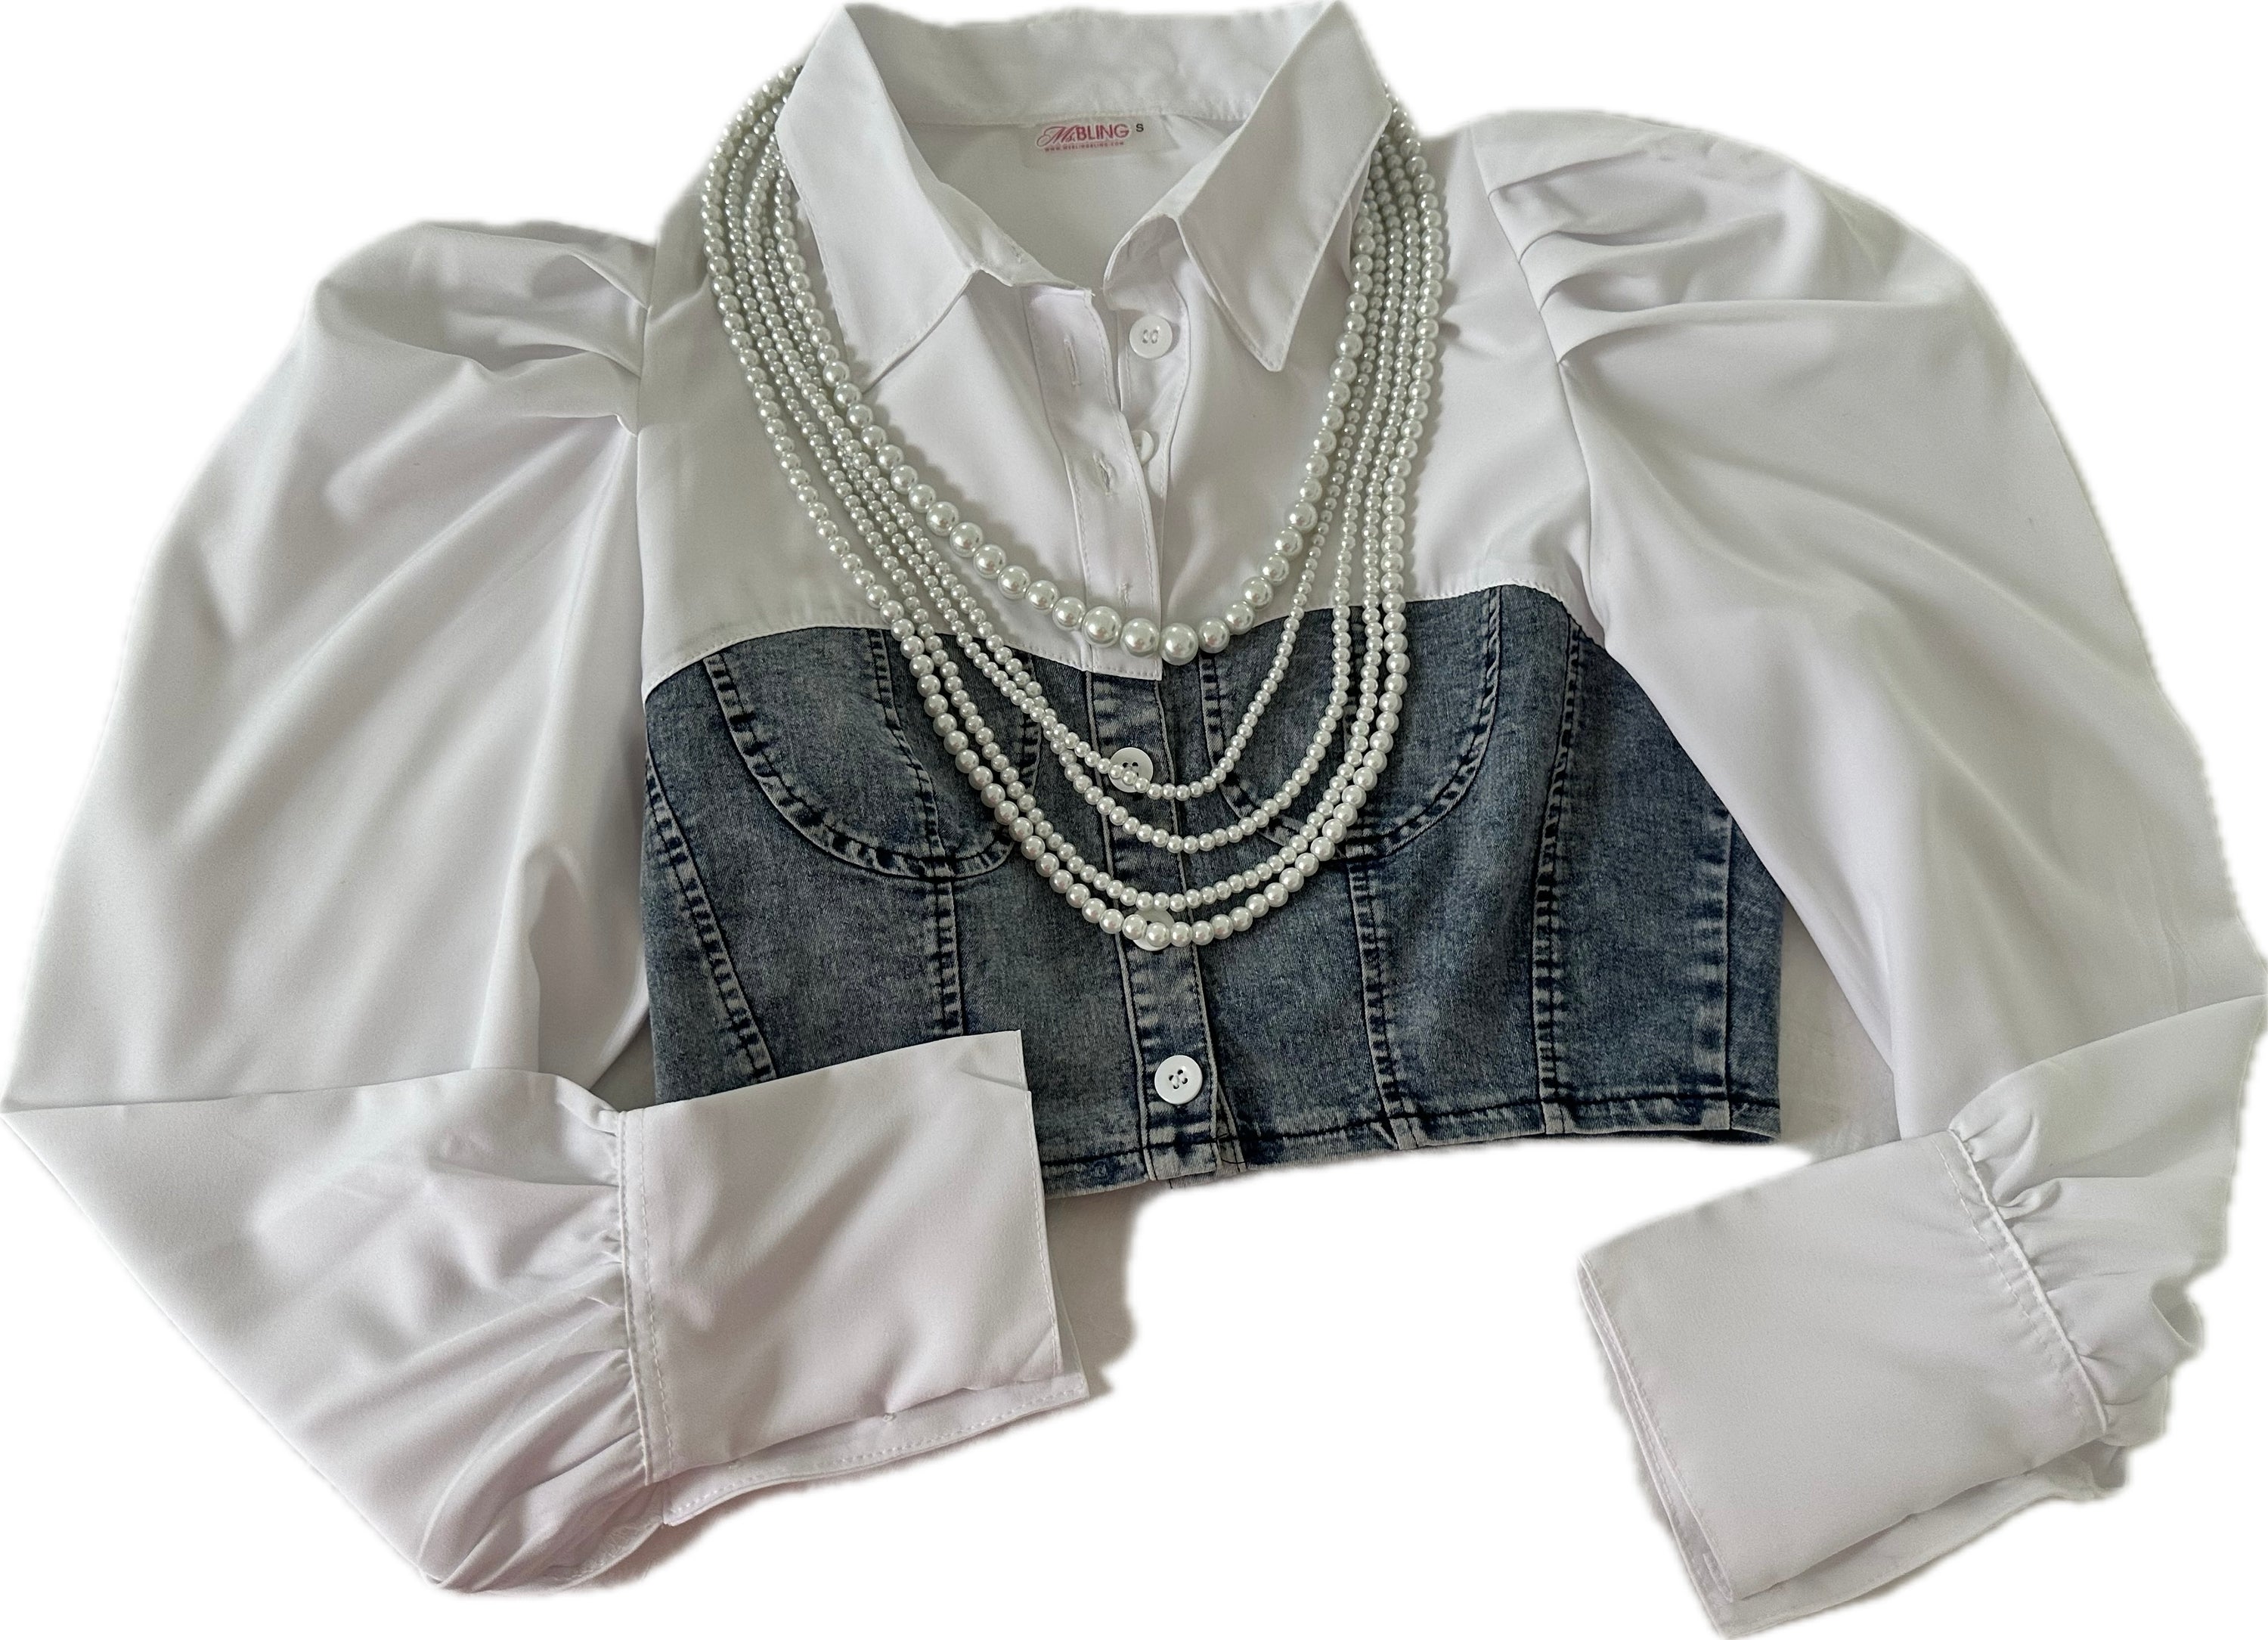 "Pearls Of Wisdom" Blouse